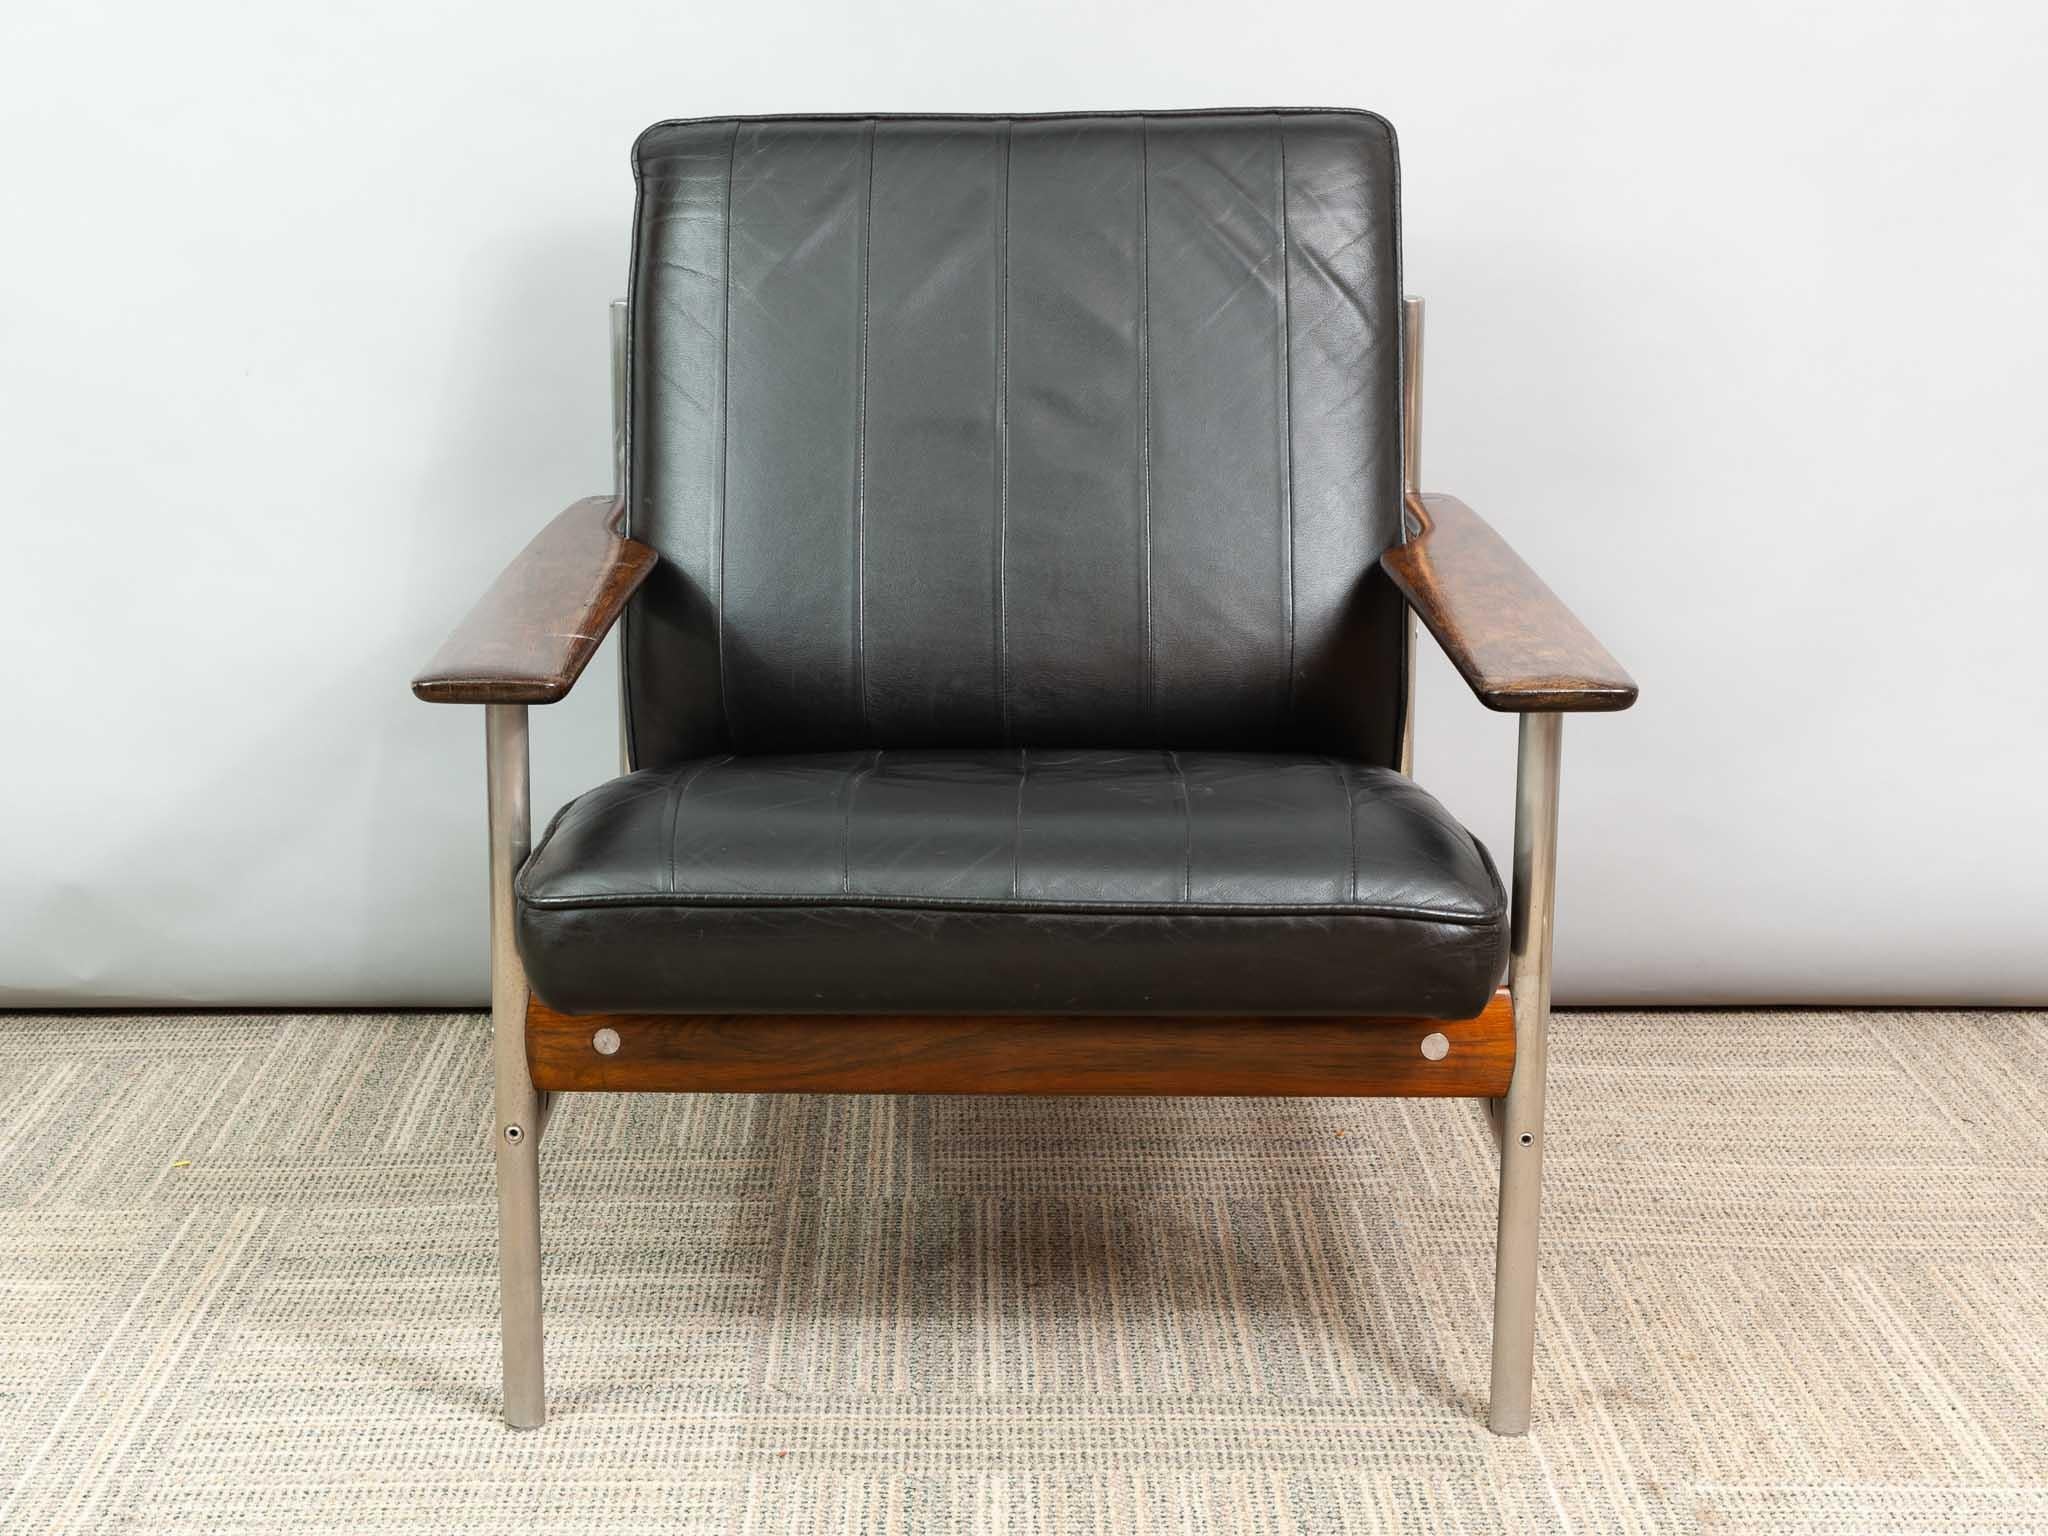 An original 1001 AF low lounge armchair designed by Sven Ivar Dysthe and manufactured in 1959 by Dokka Mobler in Norway. The frame is manufactured from a combination of Rosewood, chrome-plated metal tubes and black leather upholstery.

The black